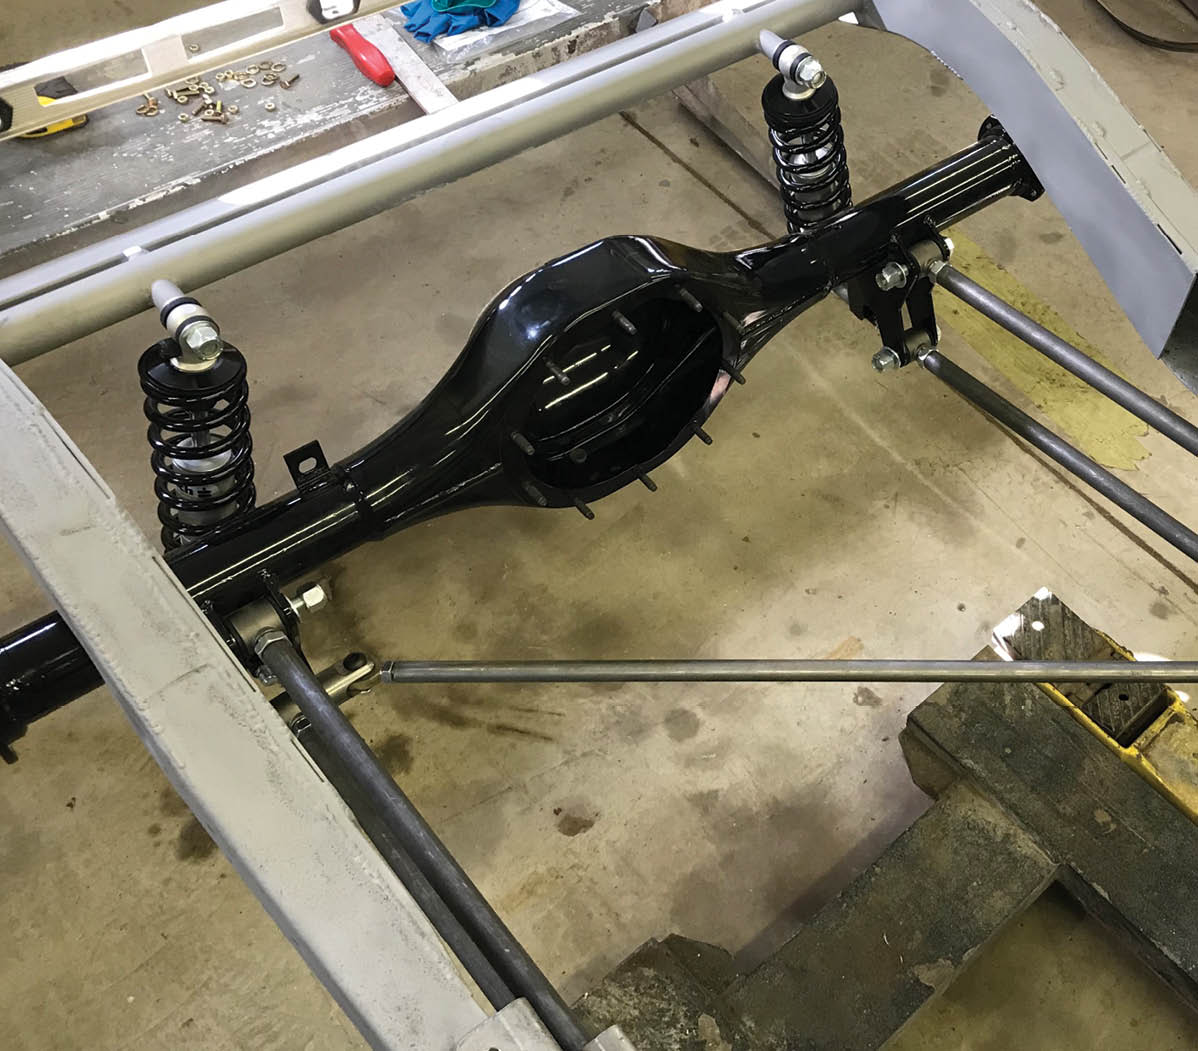 The rear suspension is made up of coilovers, four-bars, and a diagonal locator all from Total Cost Involved (TCI). John’s Industries supplied the 9-inch Ford axle housing.